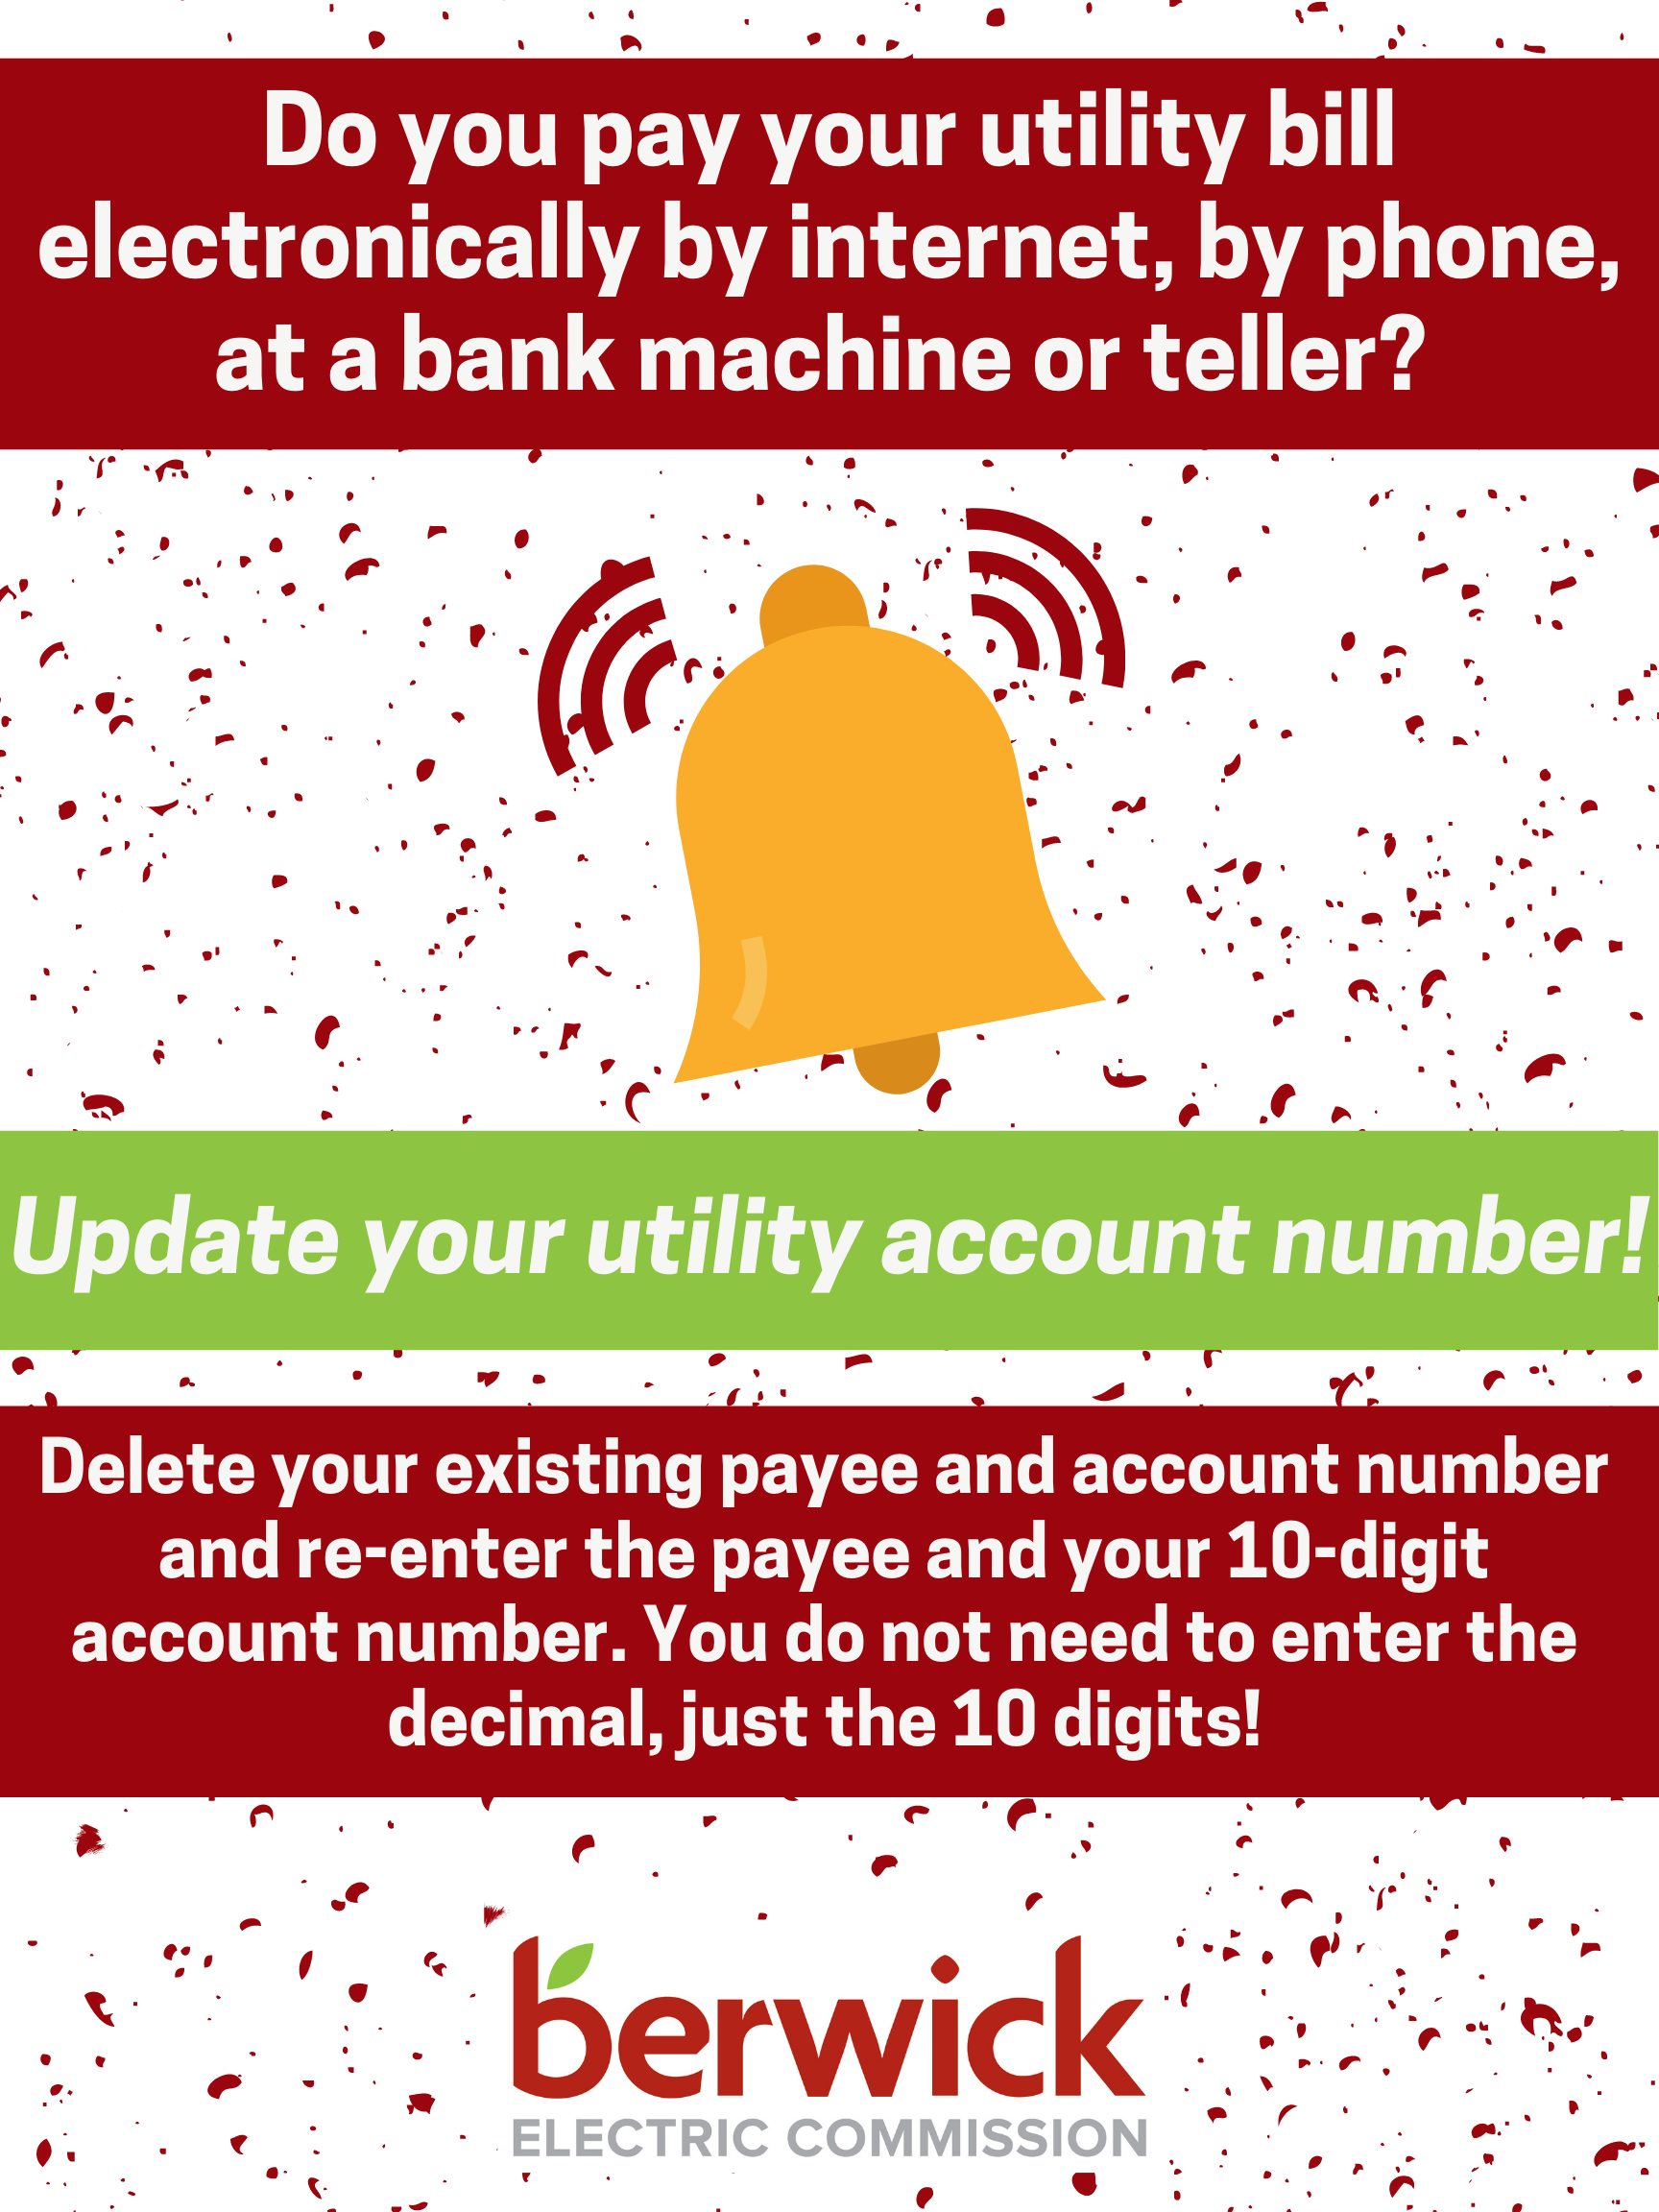 Do you pay your utility bill electronically by internet by phone at a bank machine or teller